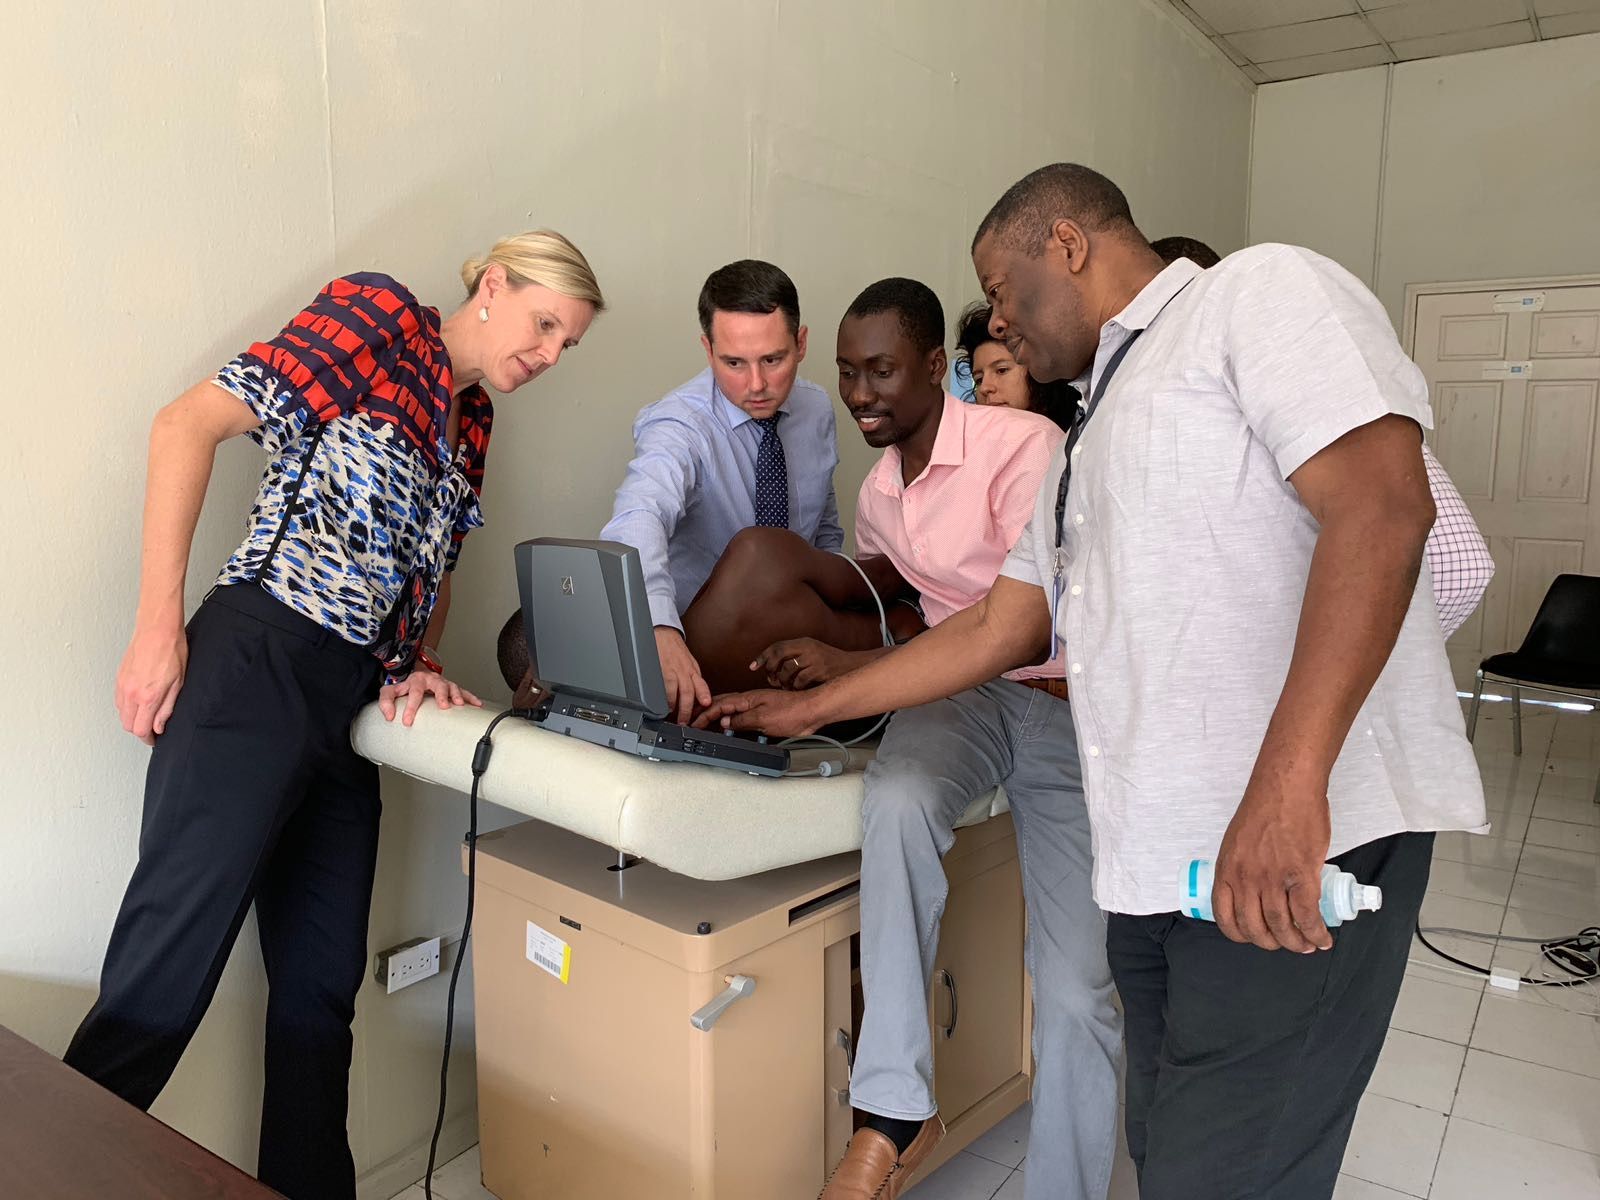 Dr. McNairy and Dr. Kingery working with Haitian study director, Dr. Victor, on cardiac imaging